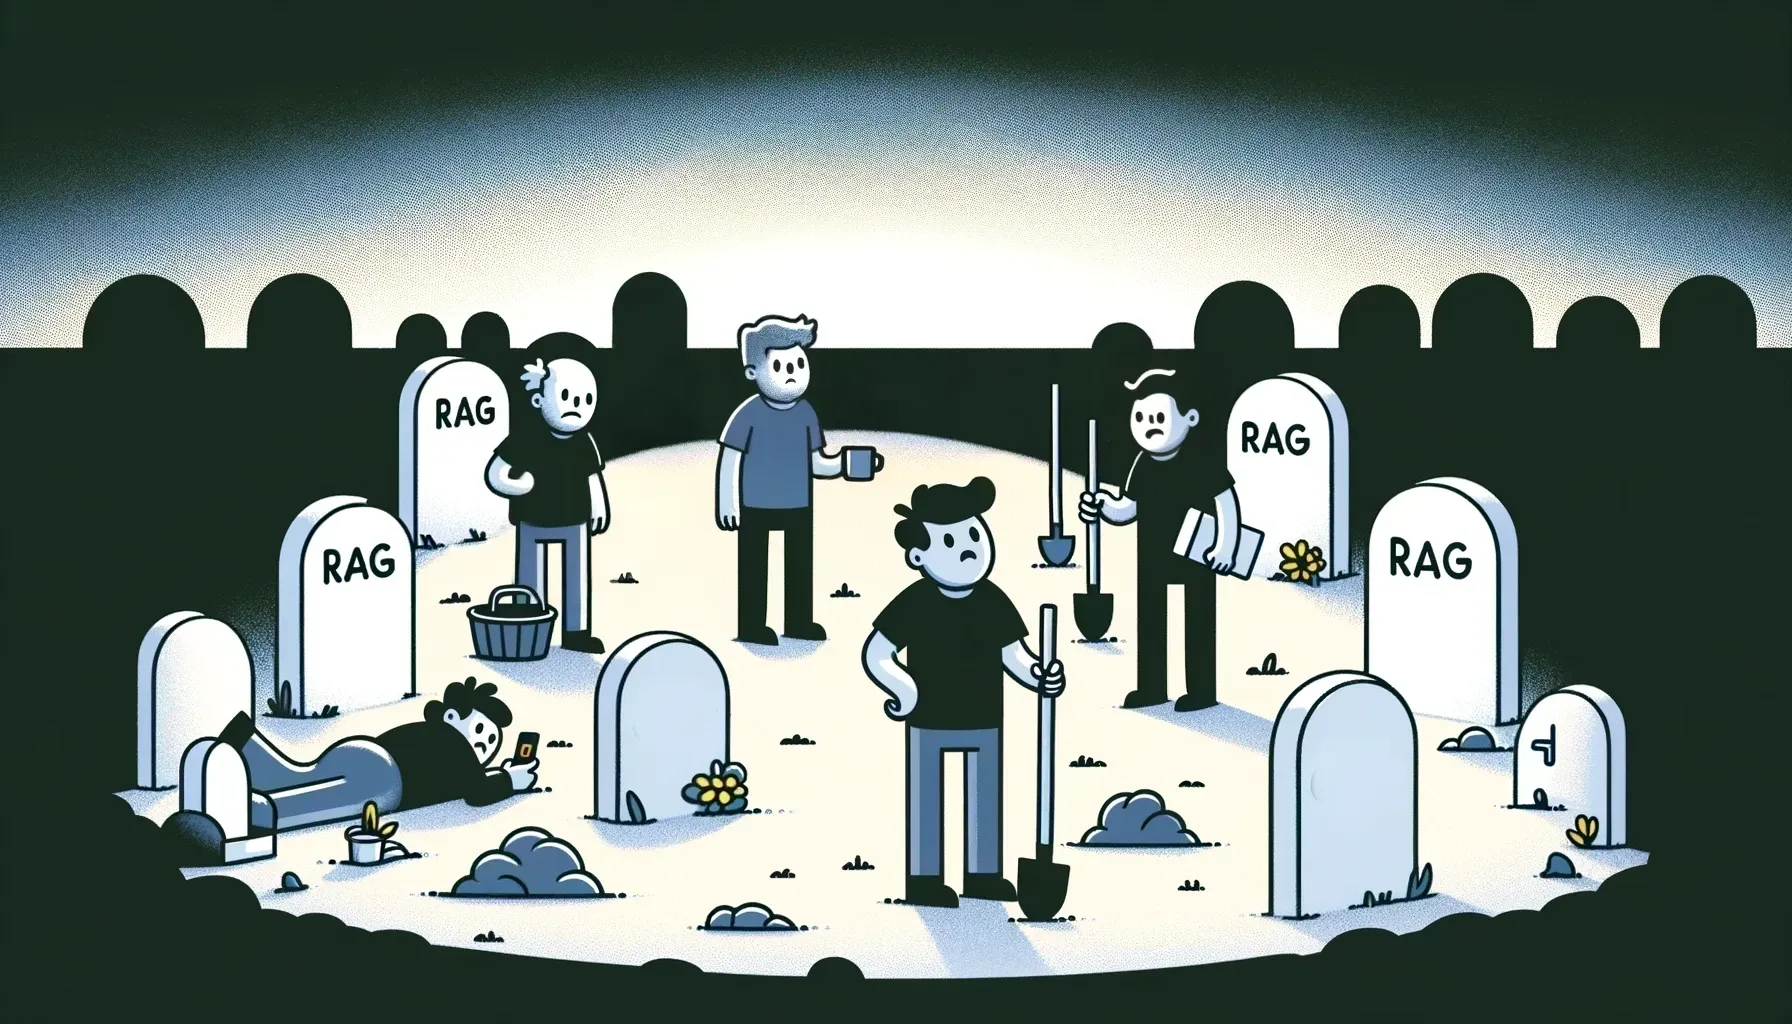 Cartoon of four characters in a cemetery with graves marked "RAG," mixing somber themes with humorous actions.